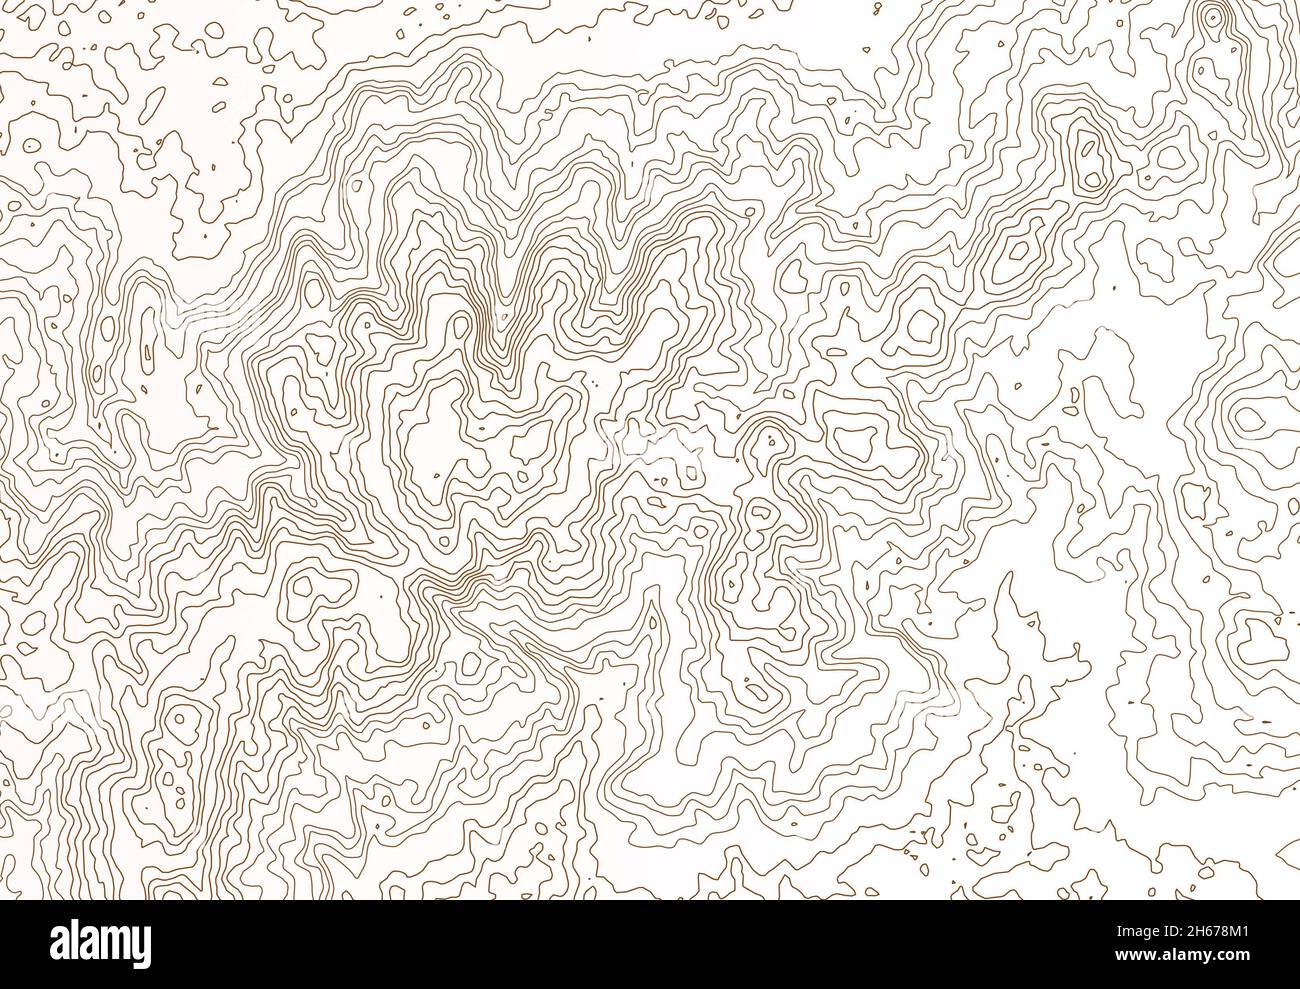 Topographic map contour background. Line map with elevation. Geographic World Topography map grid abstract illustration. Stock Photo